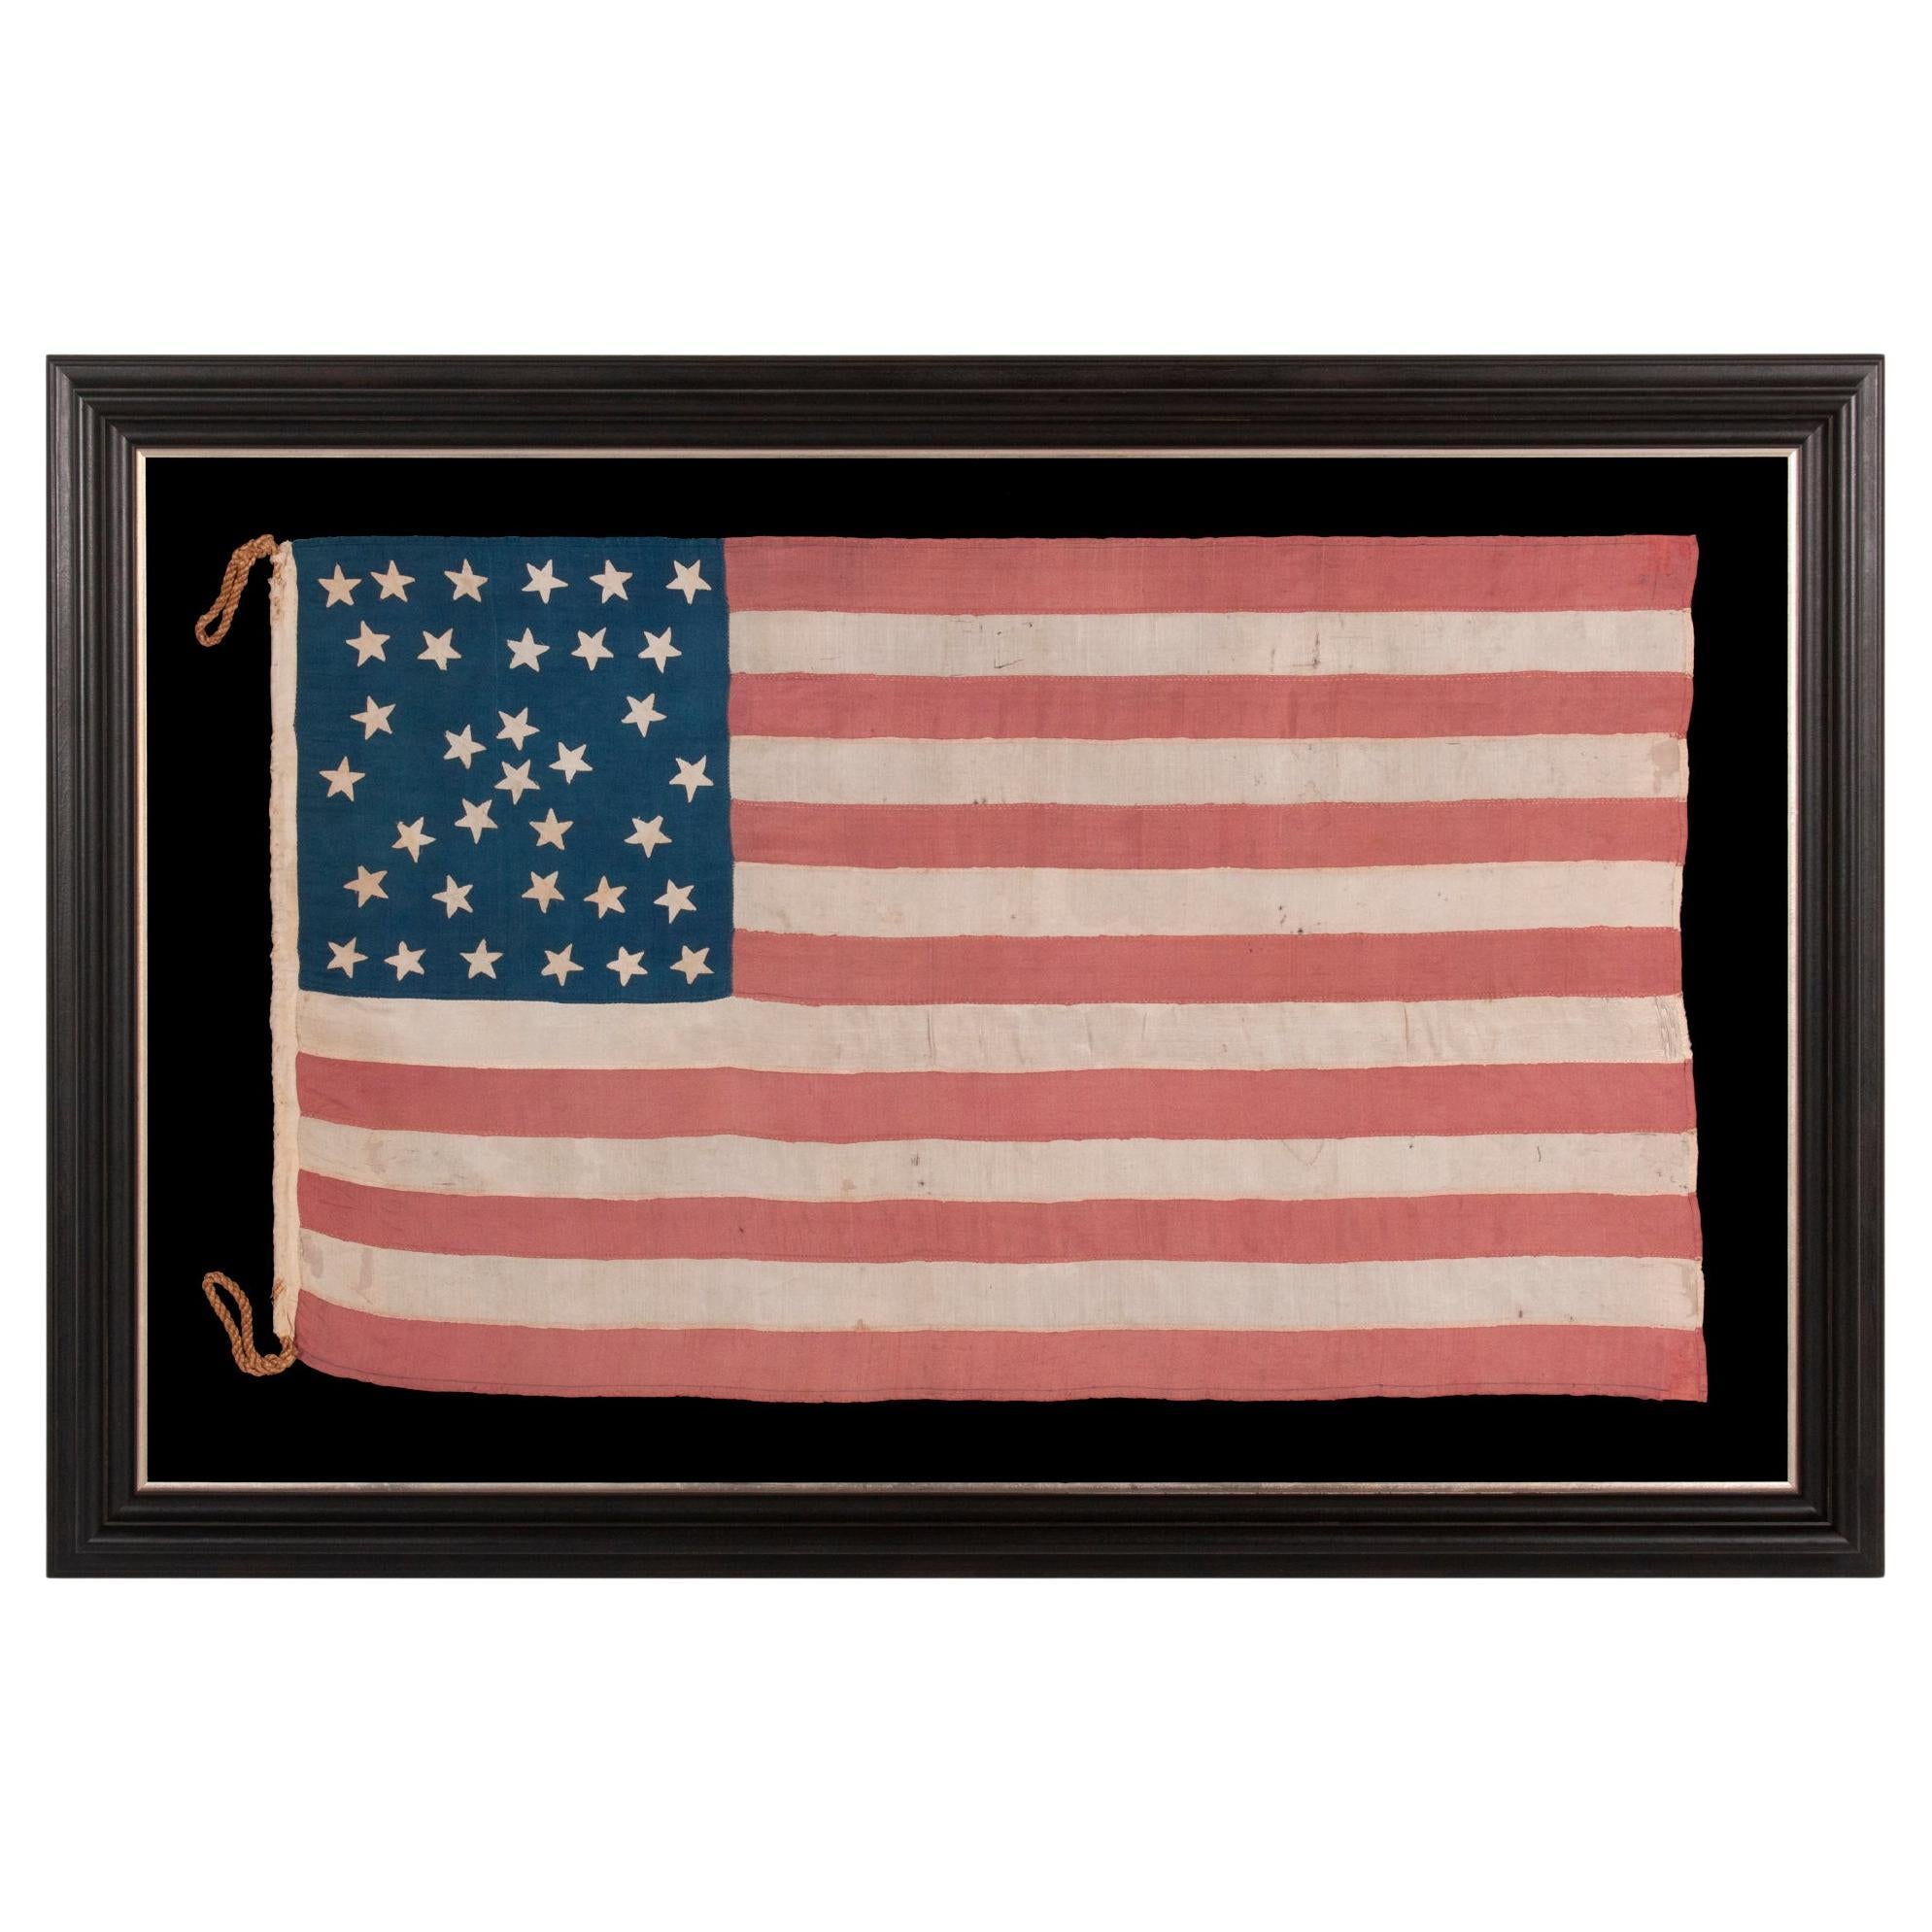 34 Star Antique American Flag with Hourglass Medallion Stars, ca 1861-1863 For Sale